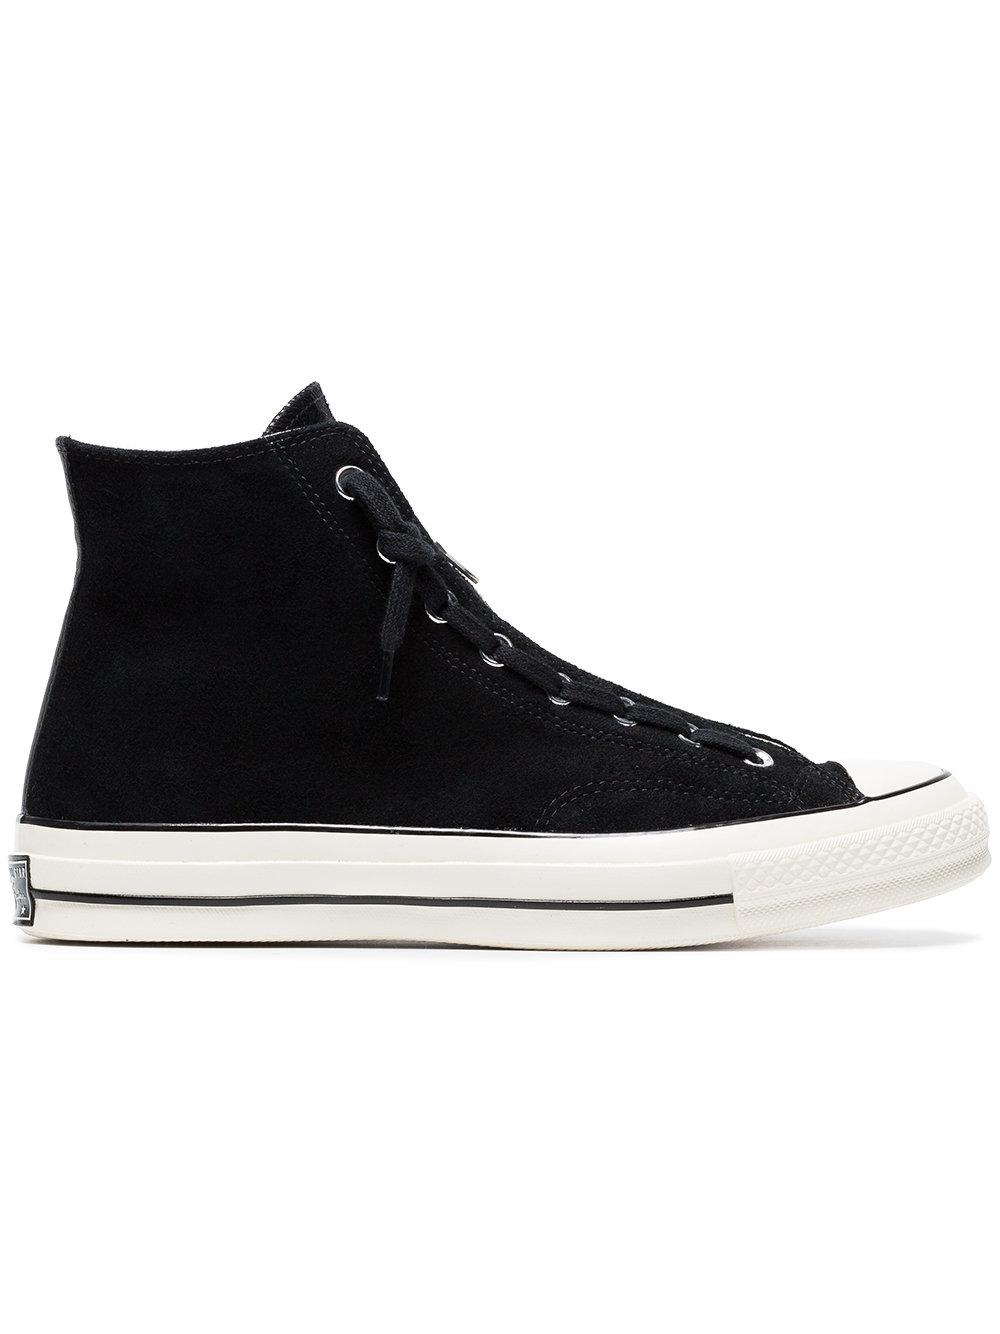 Converse Chuck Taylor All Star 70 Suede Zip Sneakers In Black | ModeSens